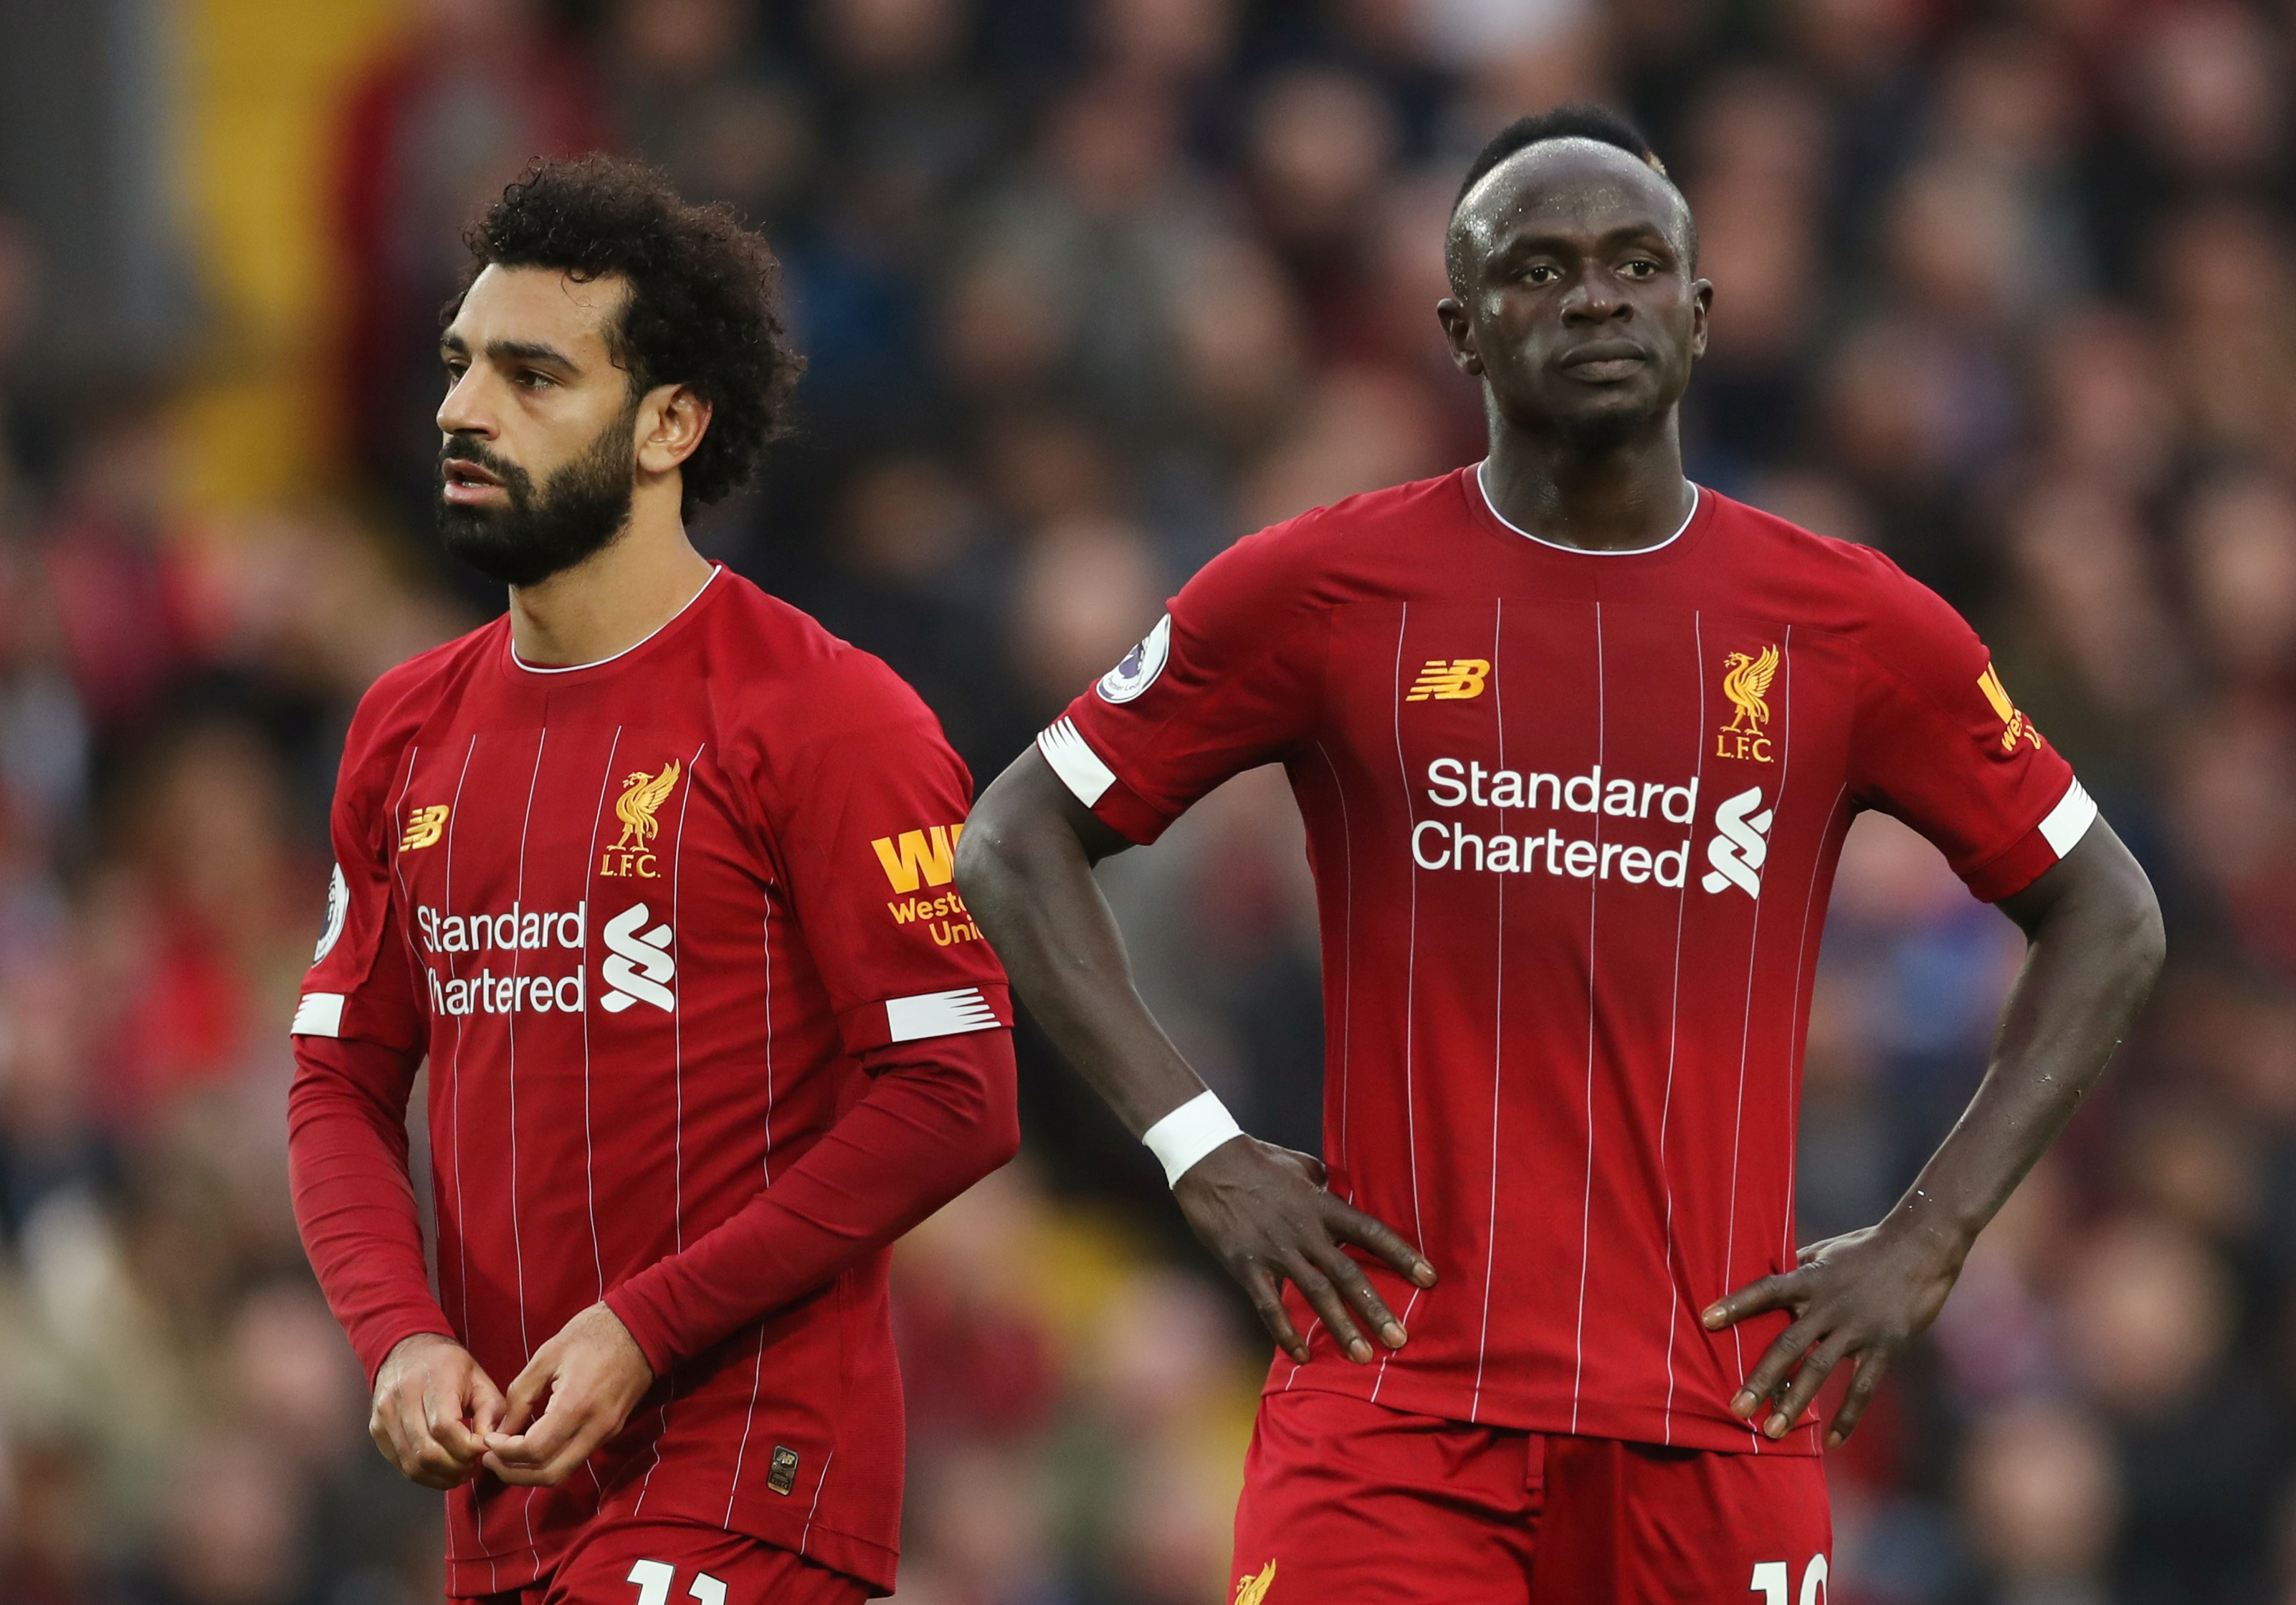 Klopp stuns FPL world by benching Mané and Alexander-Arnold